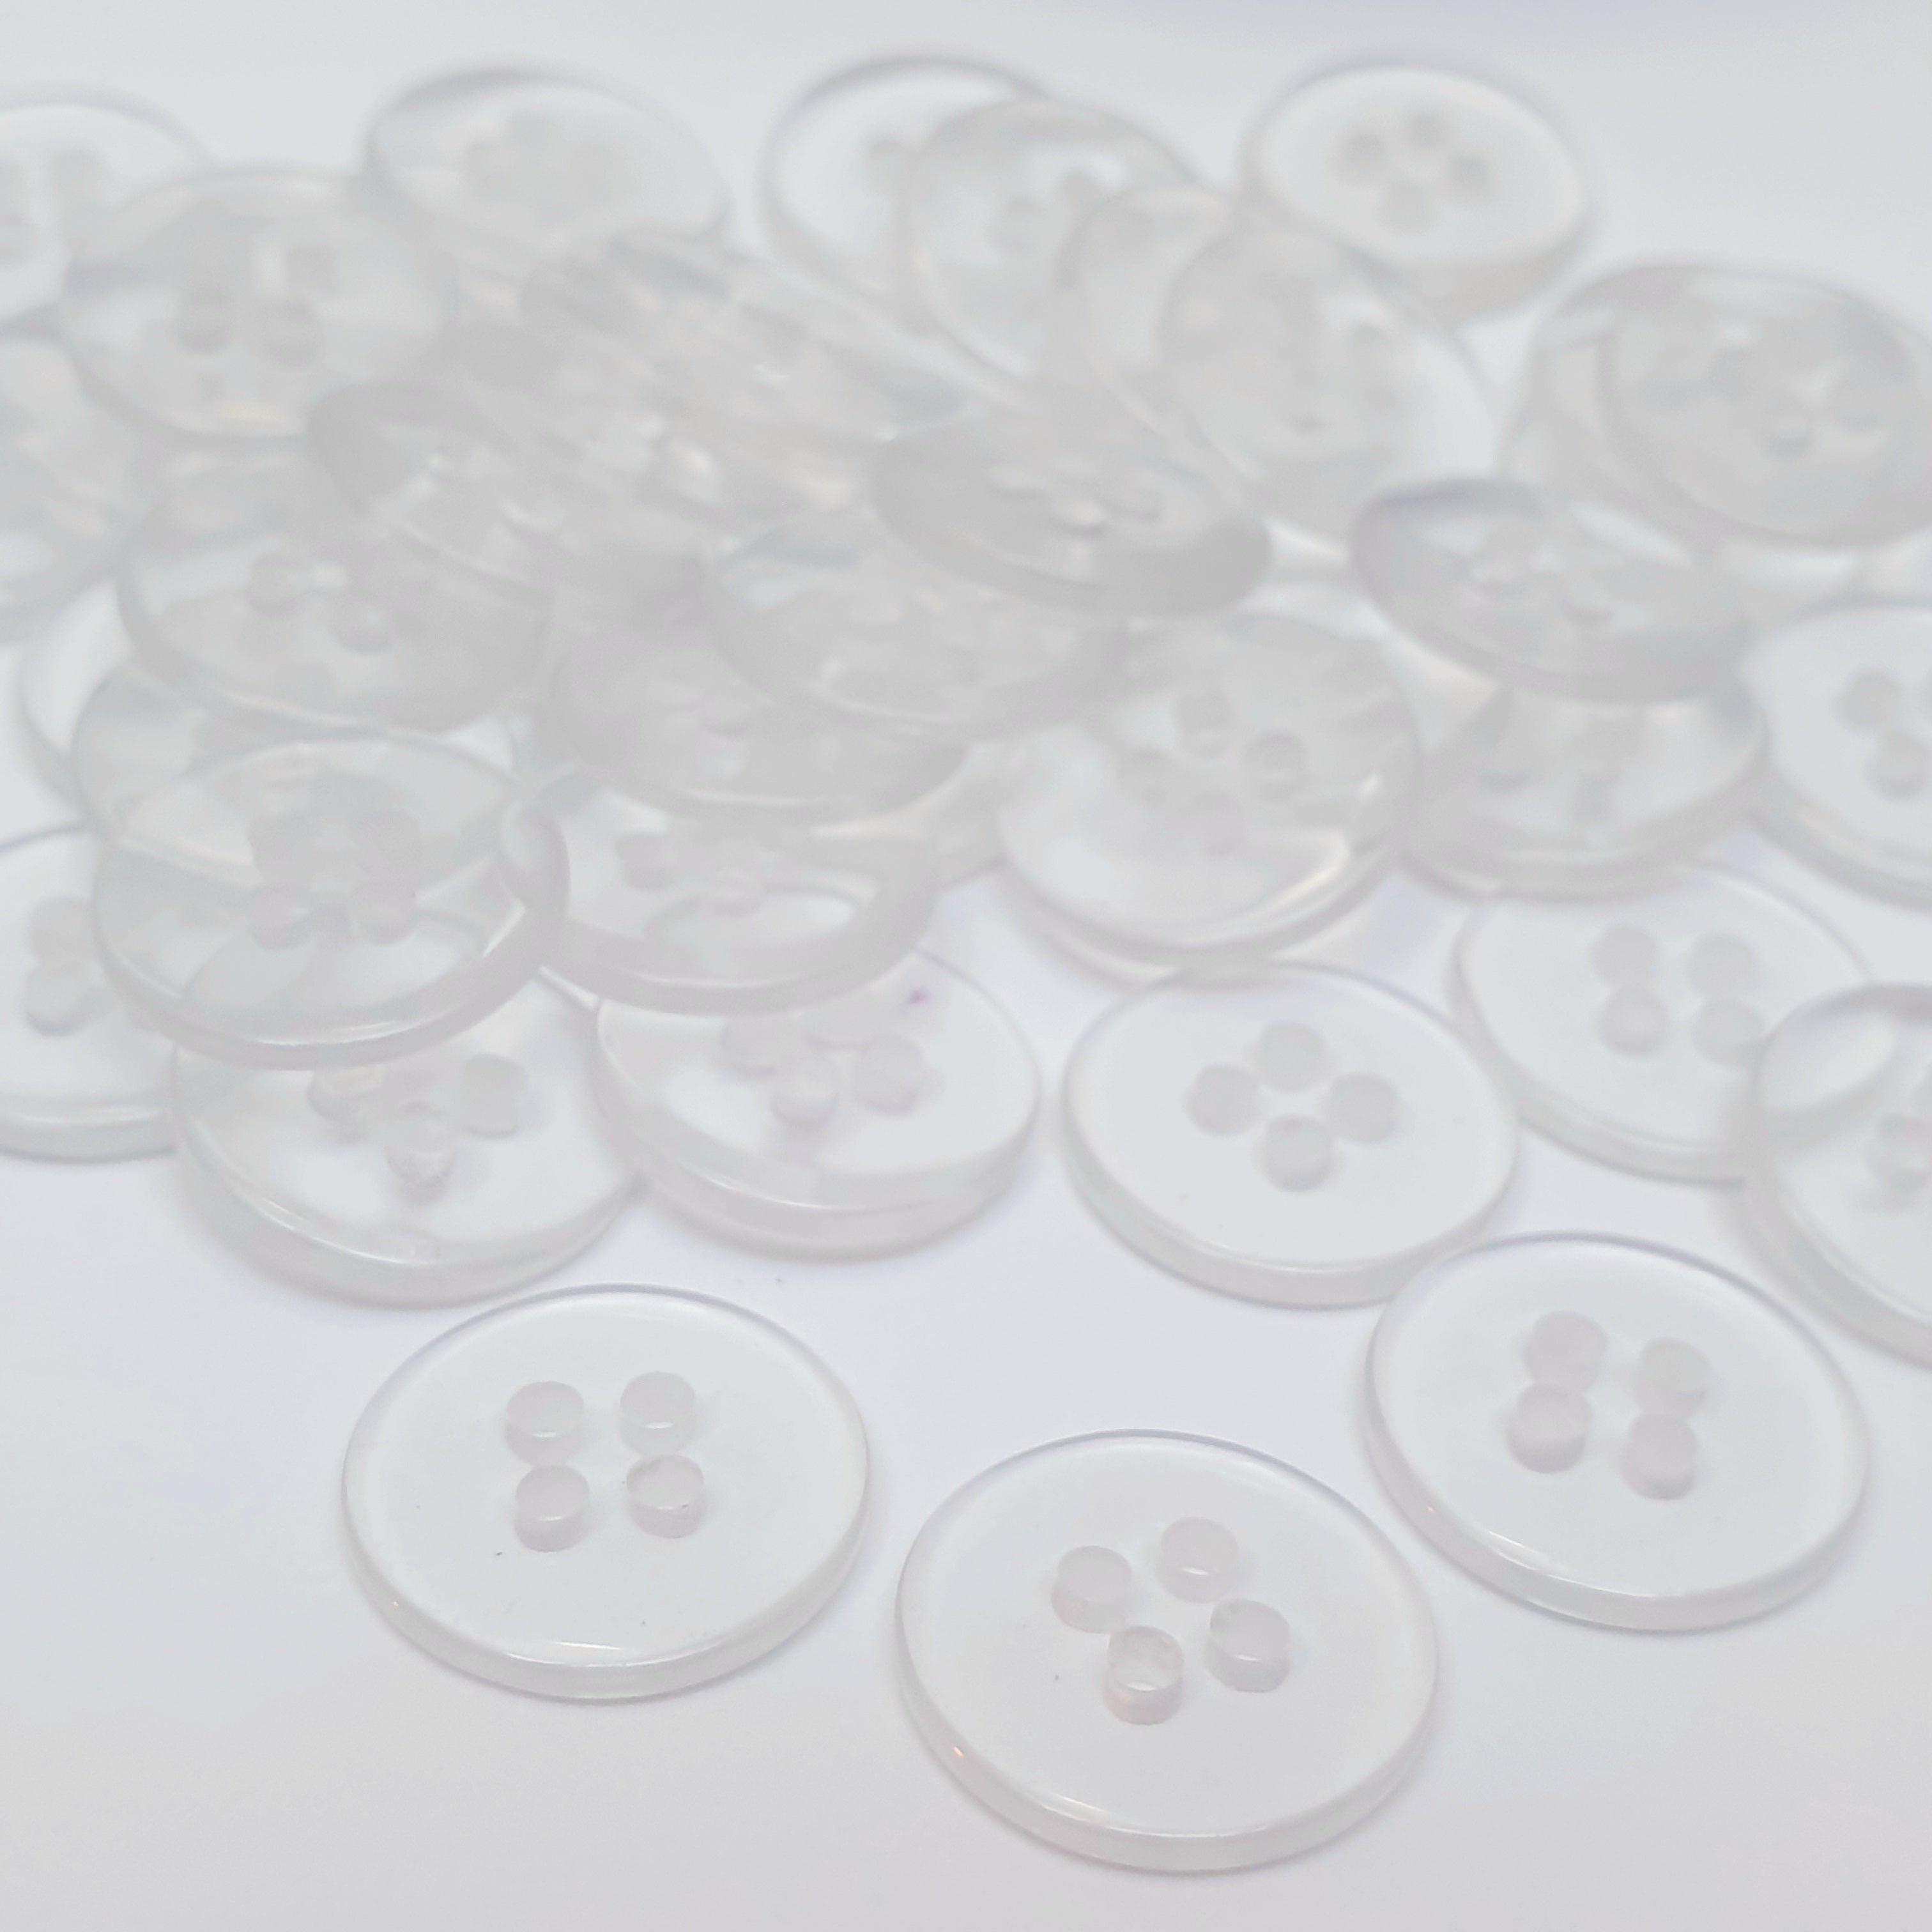 MajorCrafts 60pcs 15mm Transparent Clear 4 Holes Round Resin Sewing Buttons